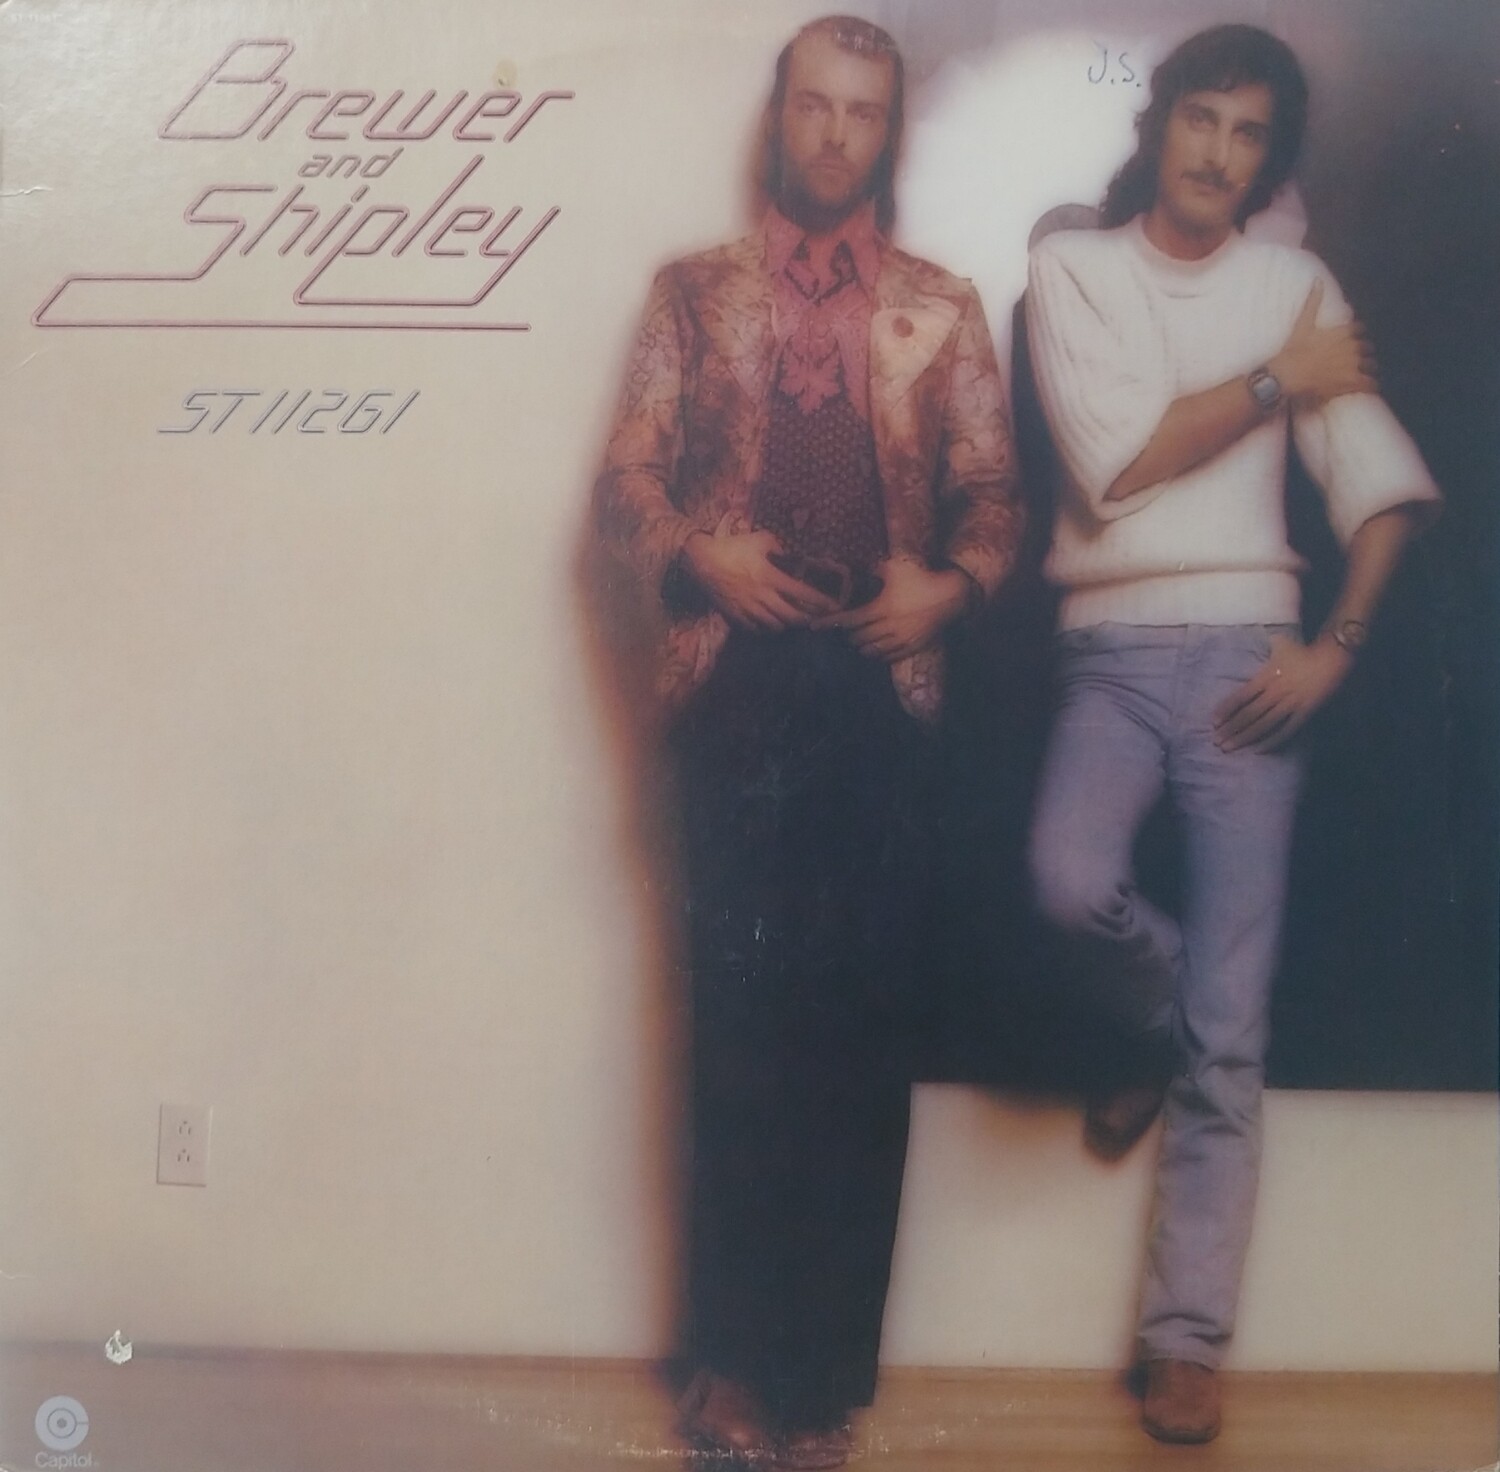 Brewer and Shipley - ST11261